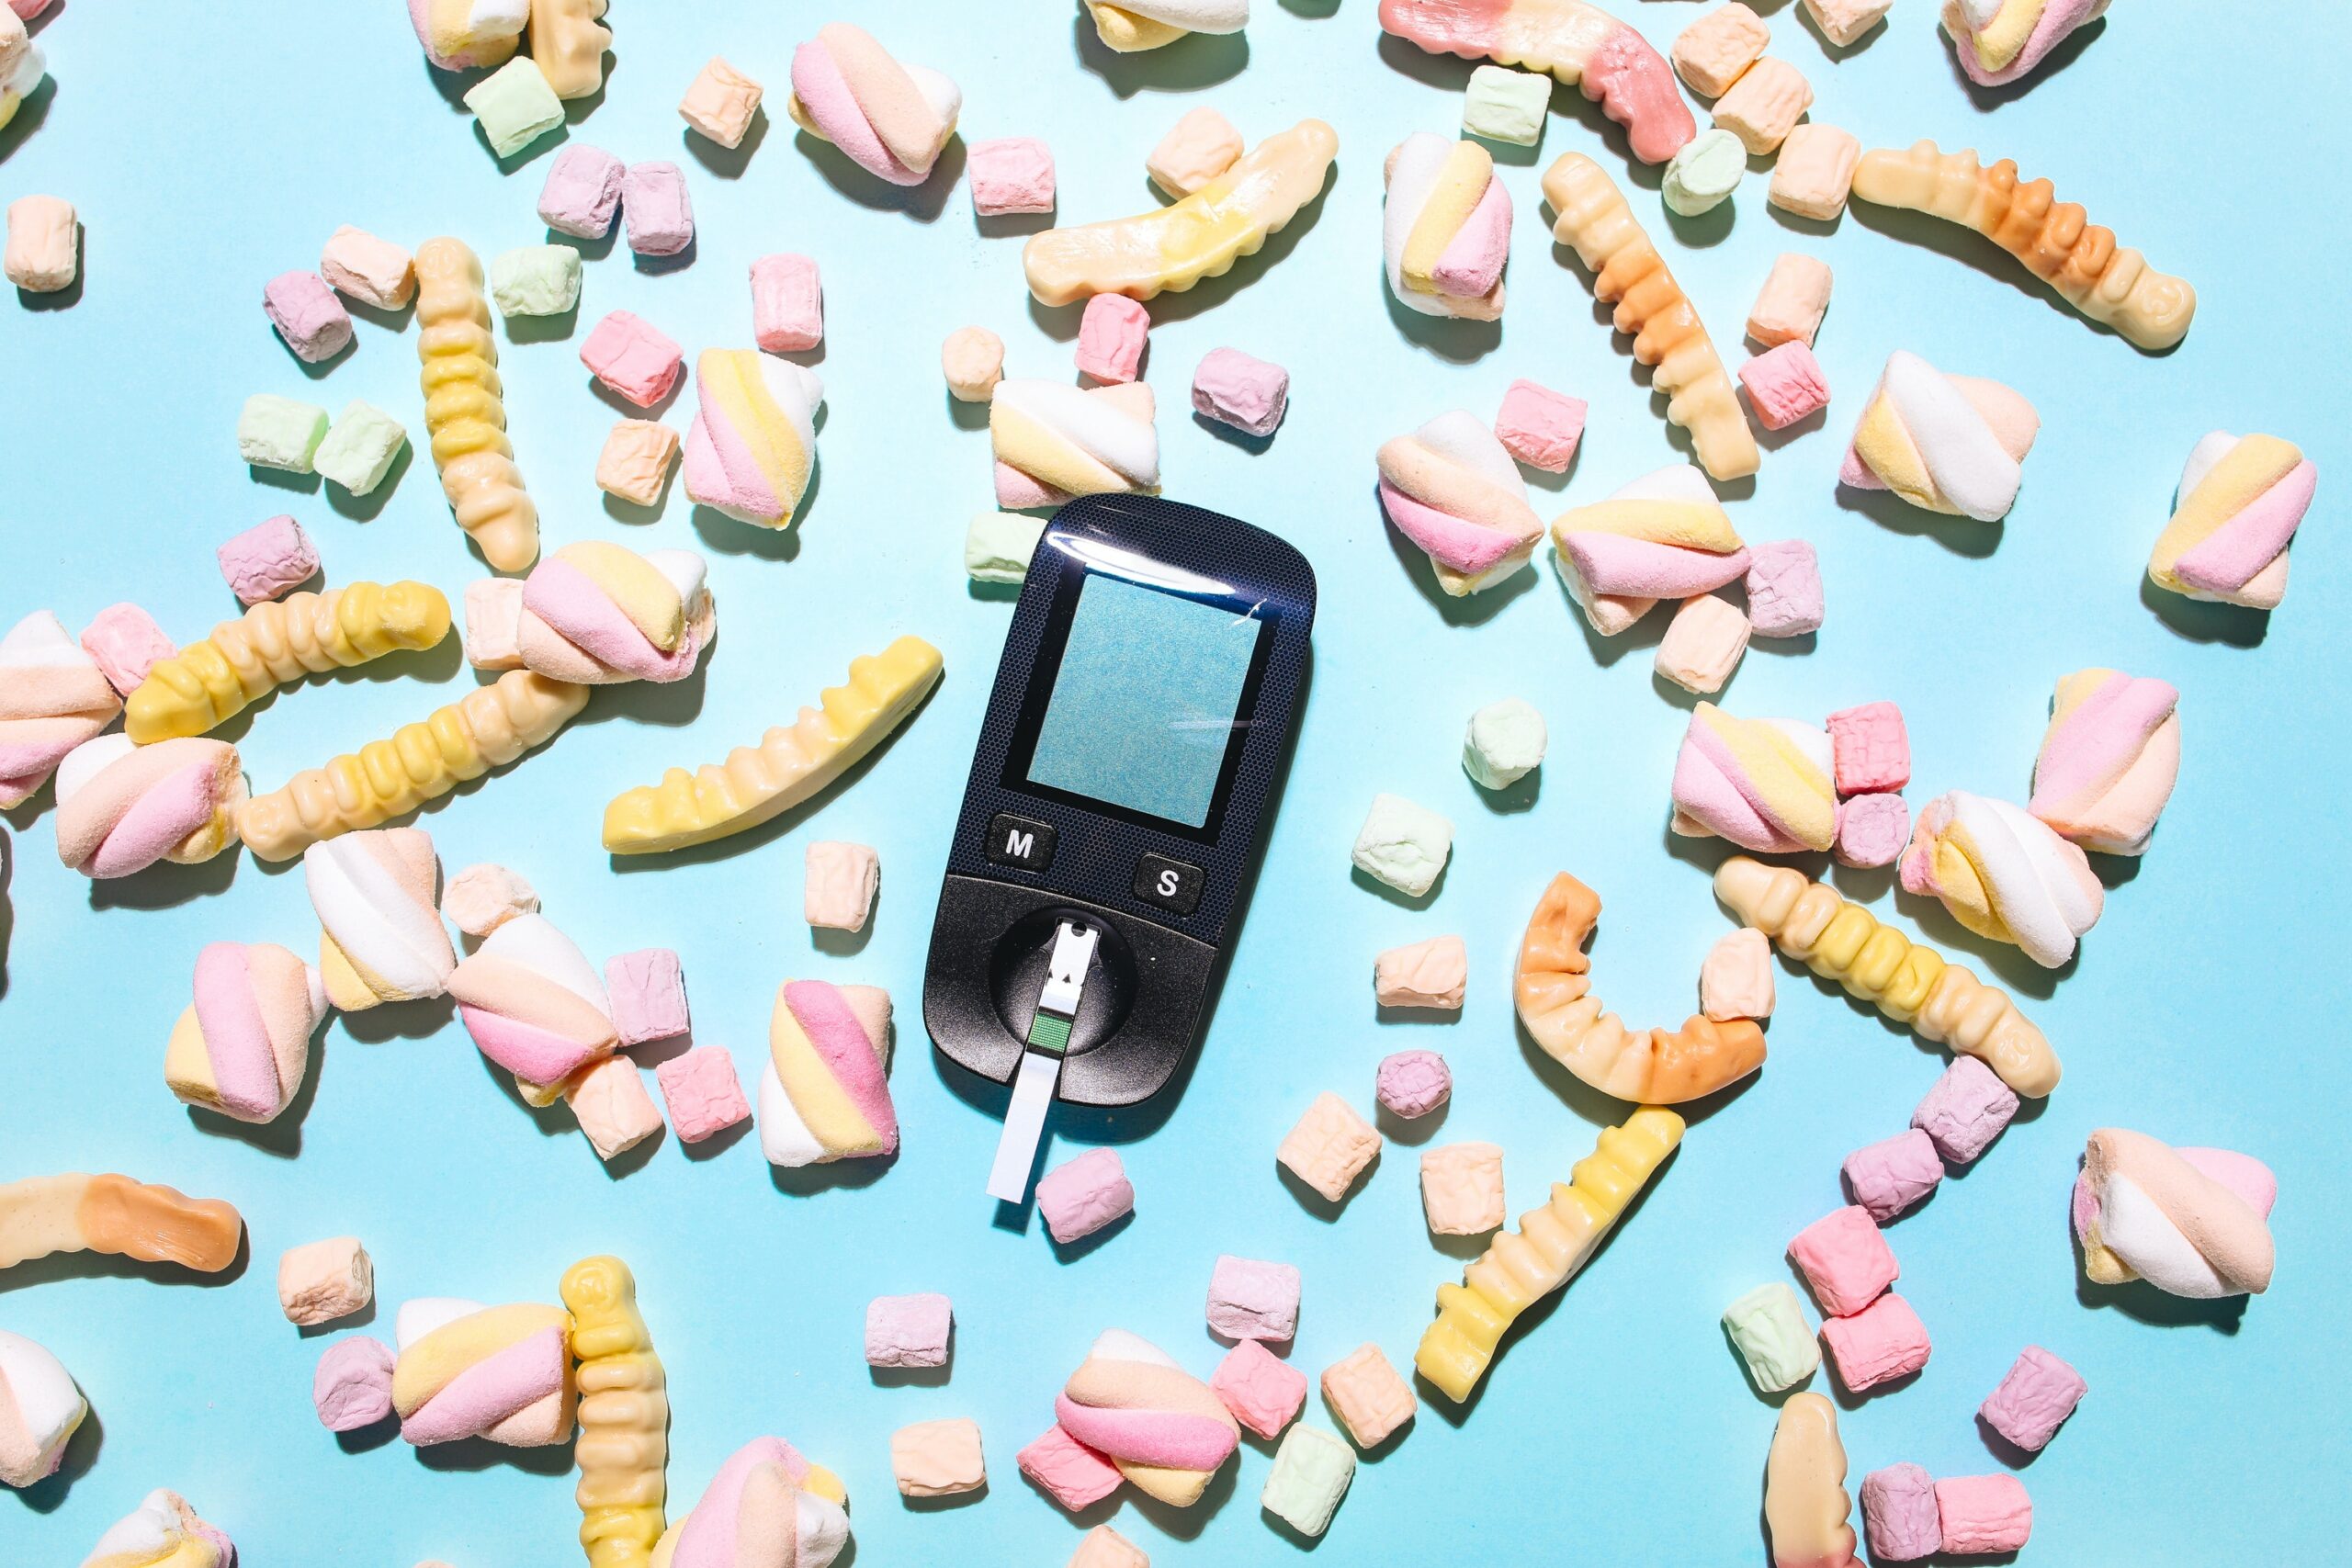 Glucose meter surrounded by sweets on a blue surface